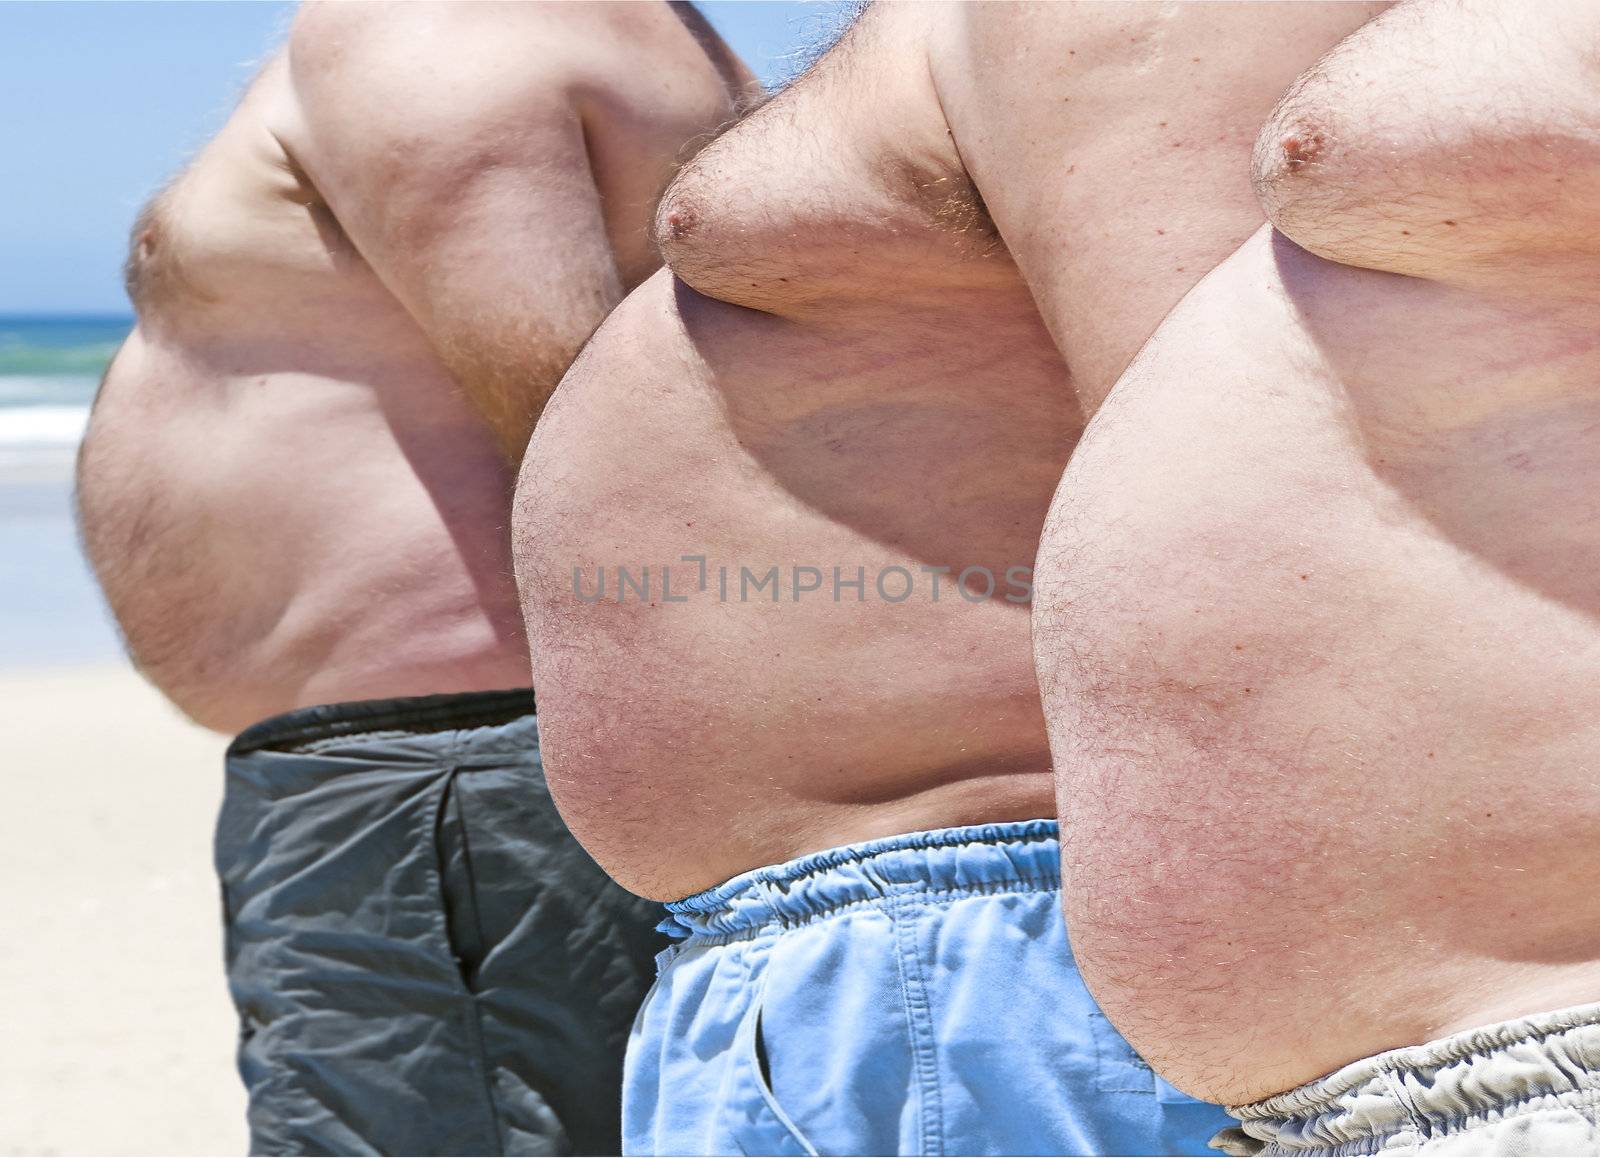 Close up of three obese fat men of the beach by tish1